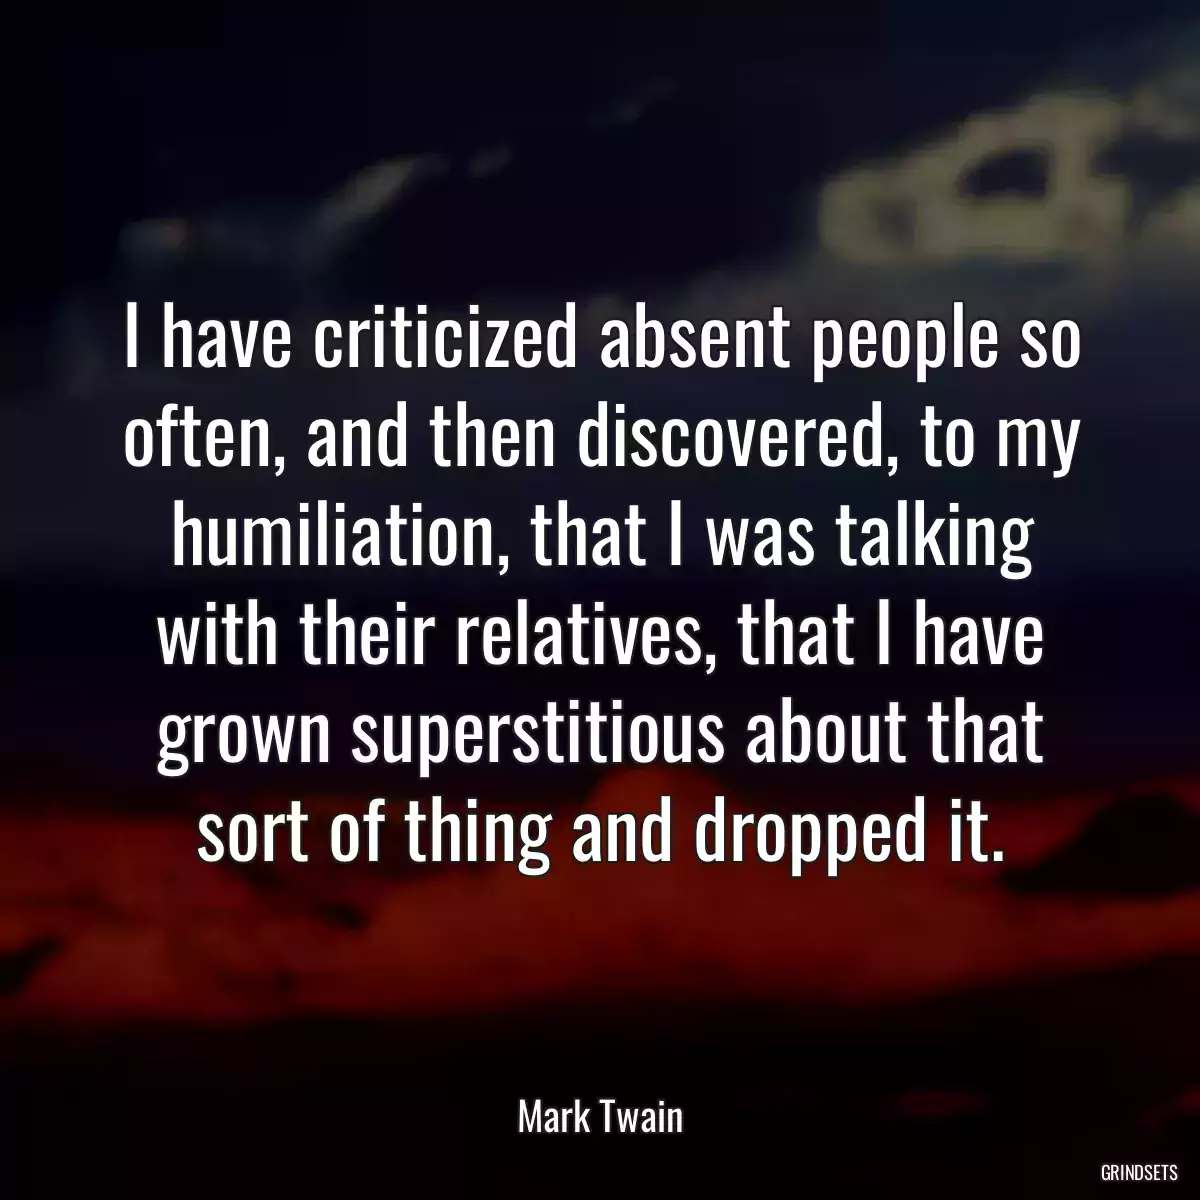 I have criticized absent people so often, and then discovered, to my humiliation, that I was talking with their relatives, that I have grown superstitious about that sort of thing and dropped it.